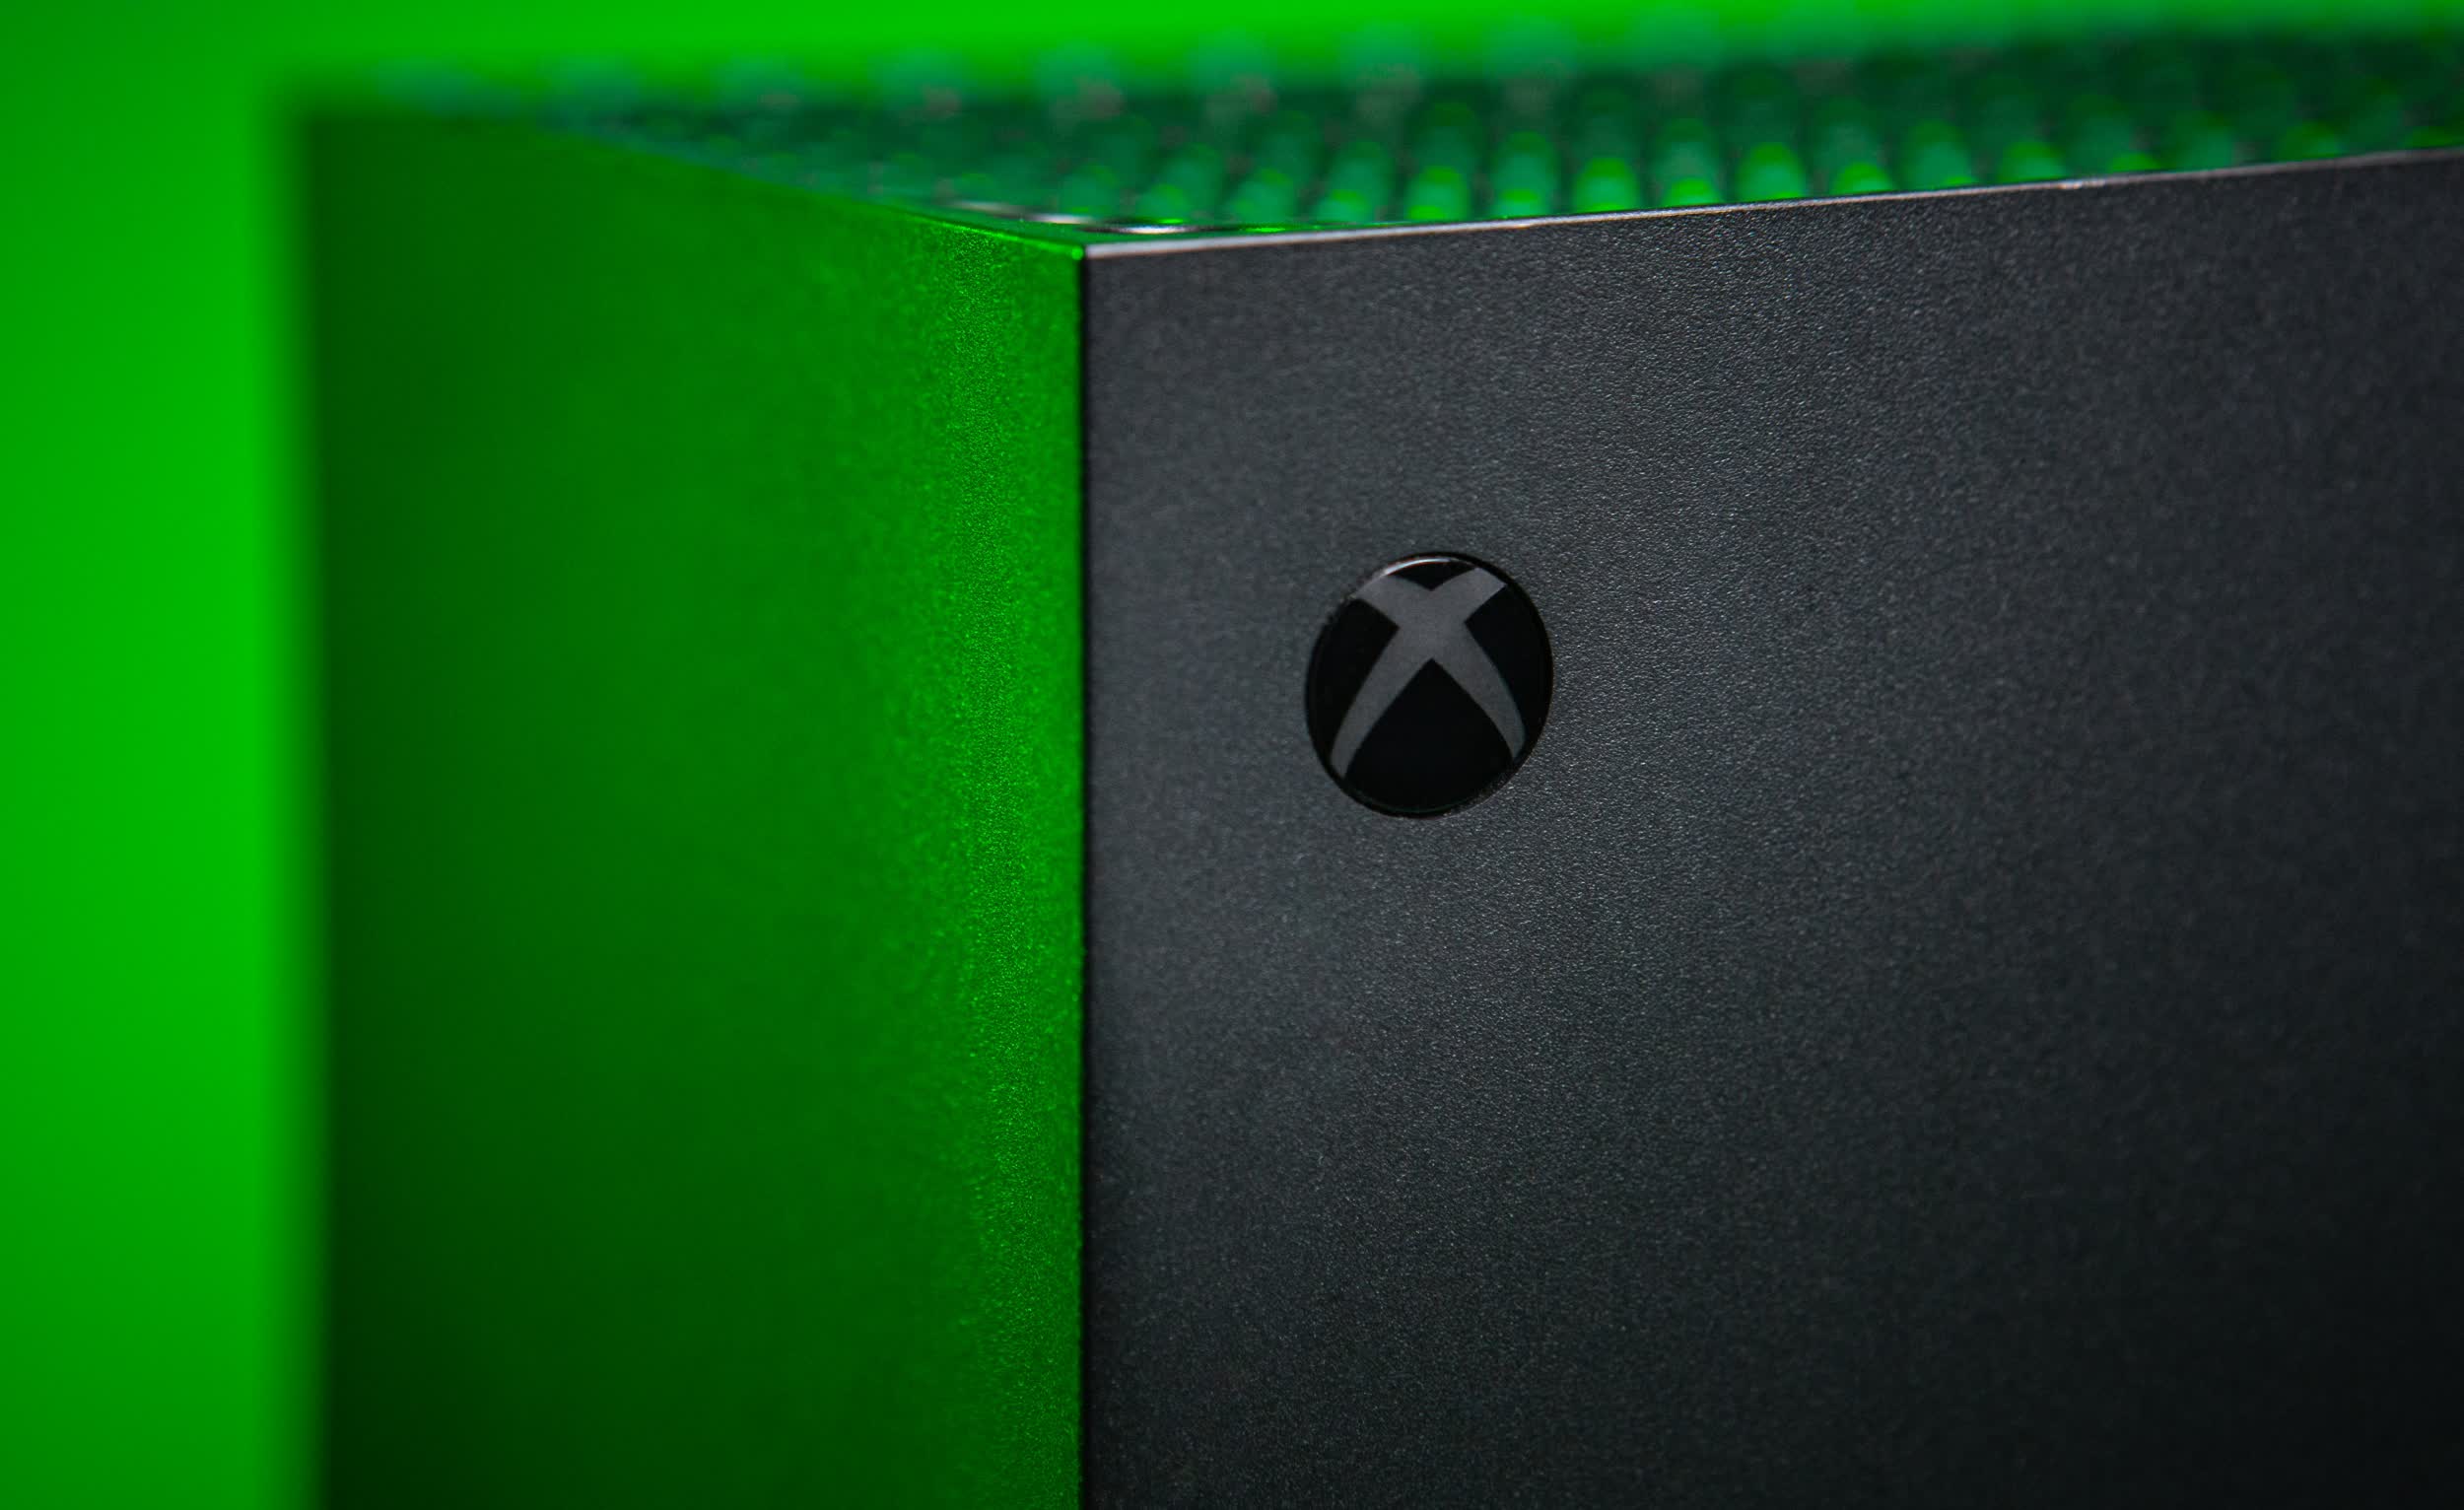 Price hikes coming to Xbox Series X and Game Pass